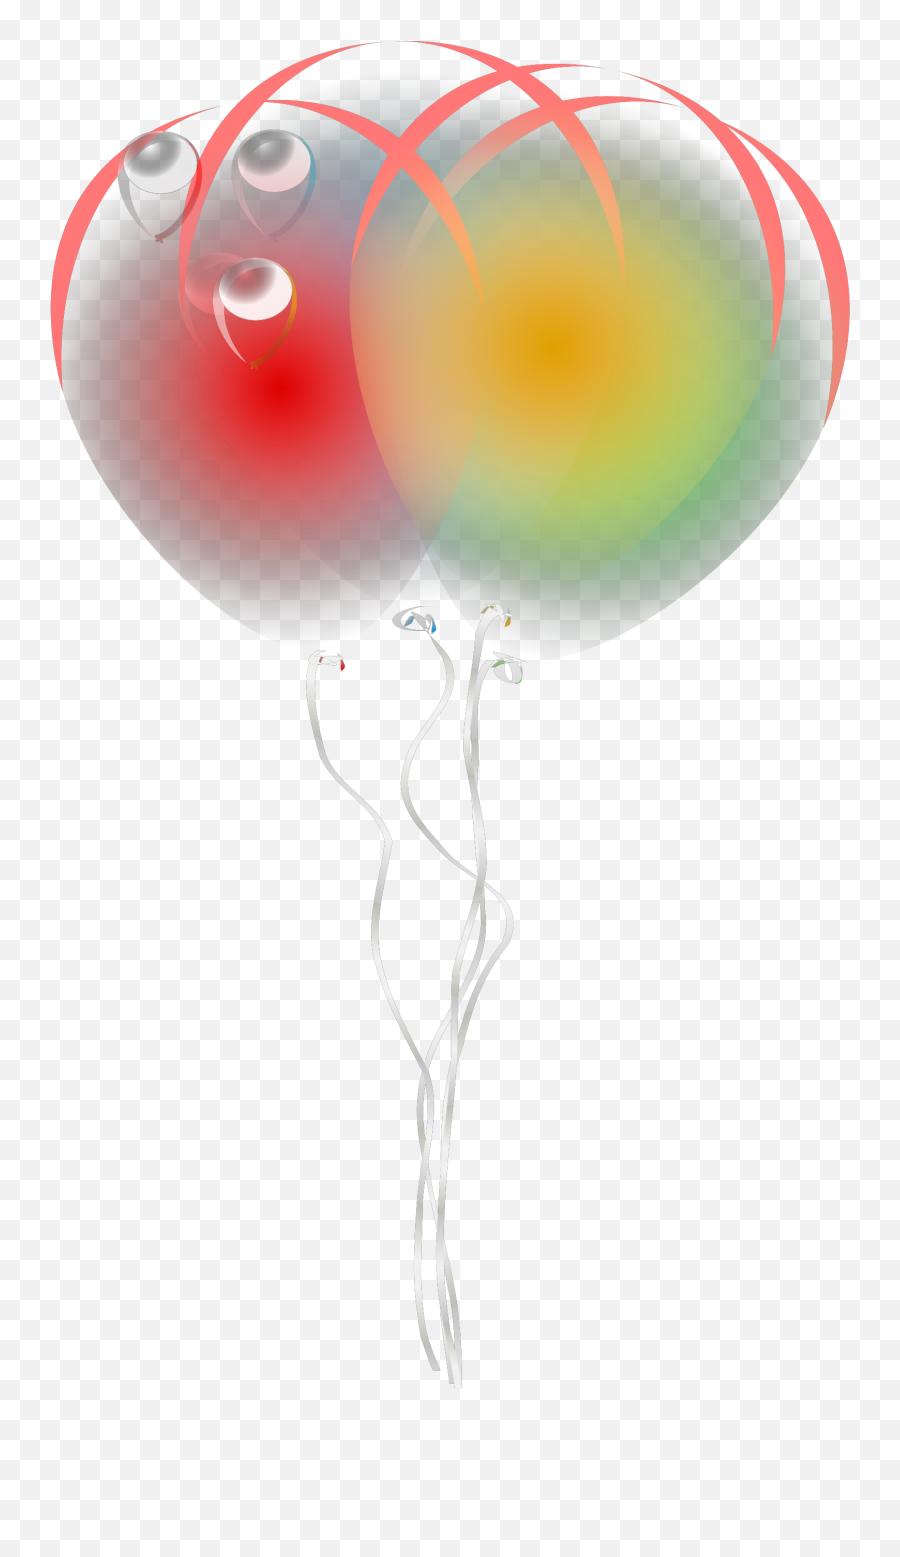 Balloons Png Svg Clip Art For Web - Download Clip Art Png Dot,Ballons Icon Party